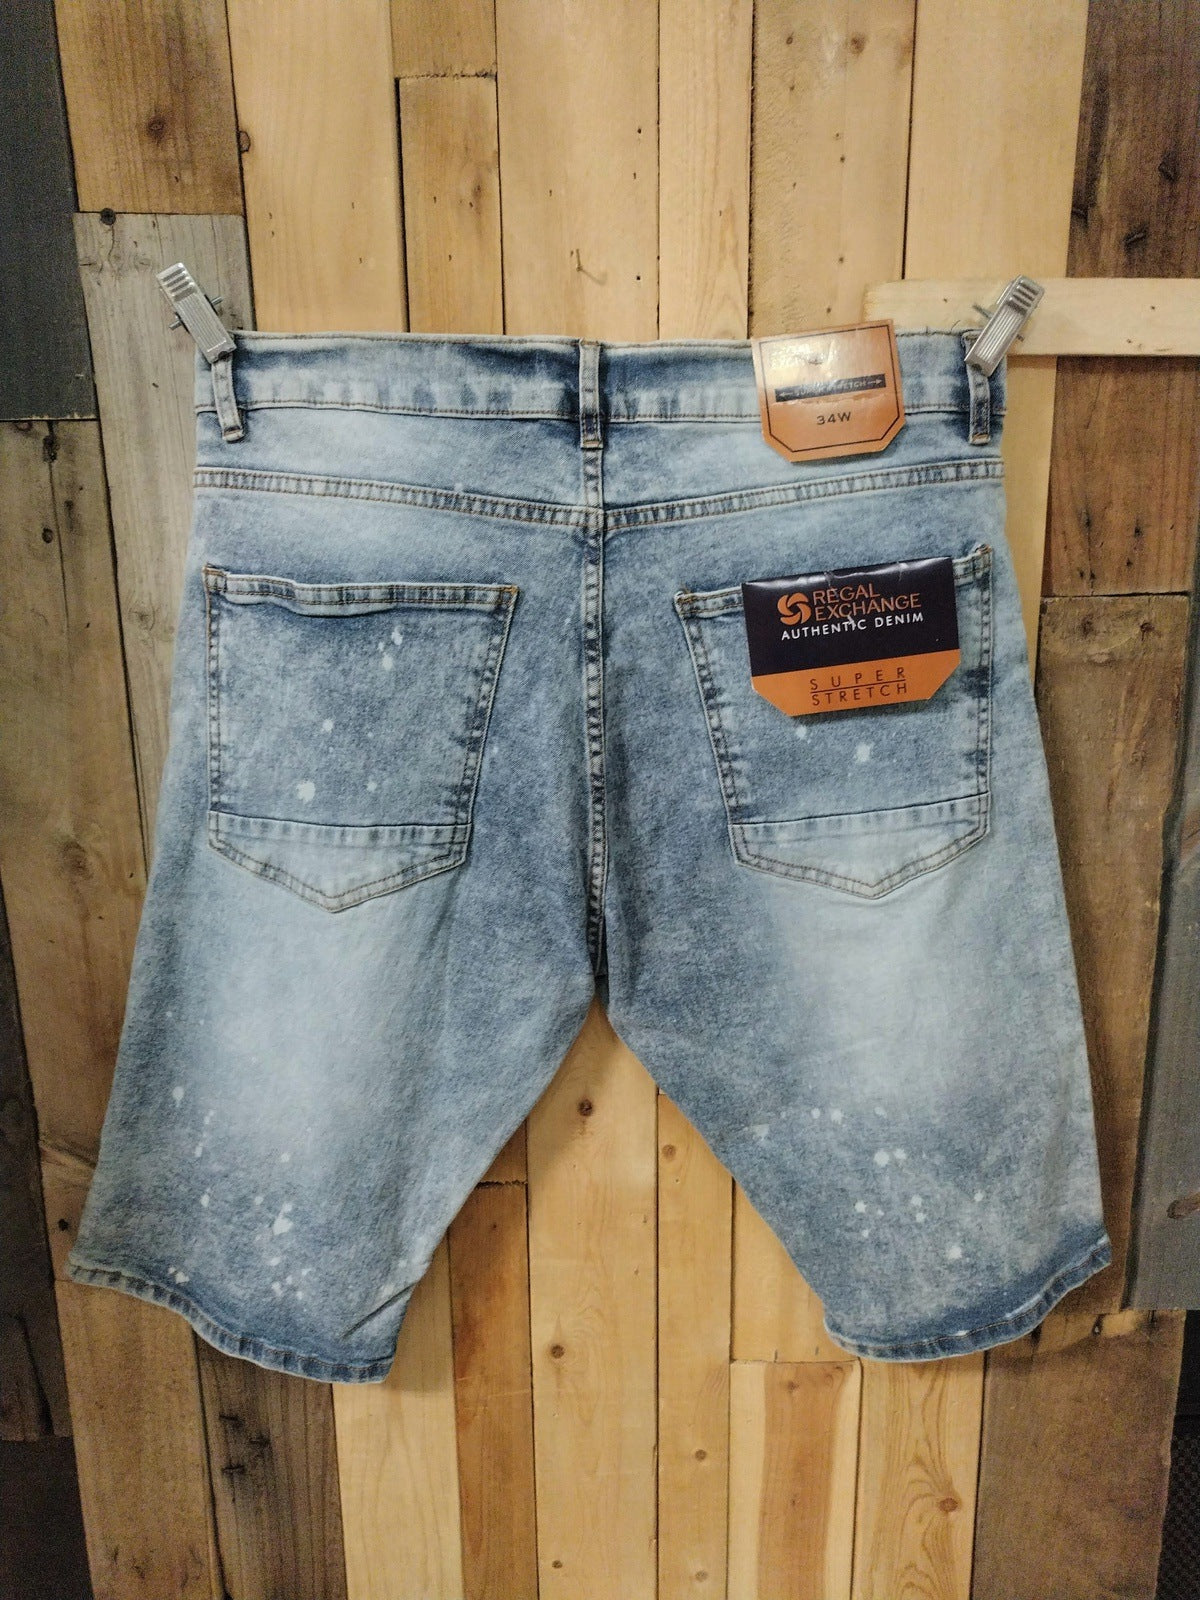 Regal Exchange Denim Shorts Men's Size 34 Super Stretch New With Tags